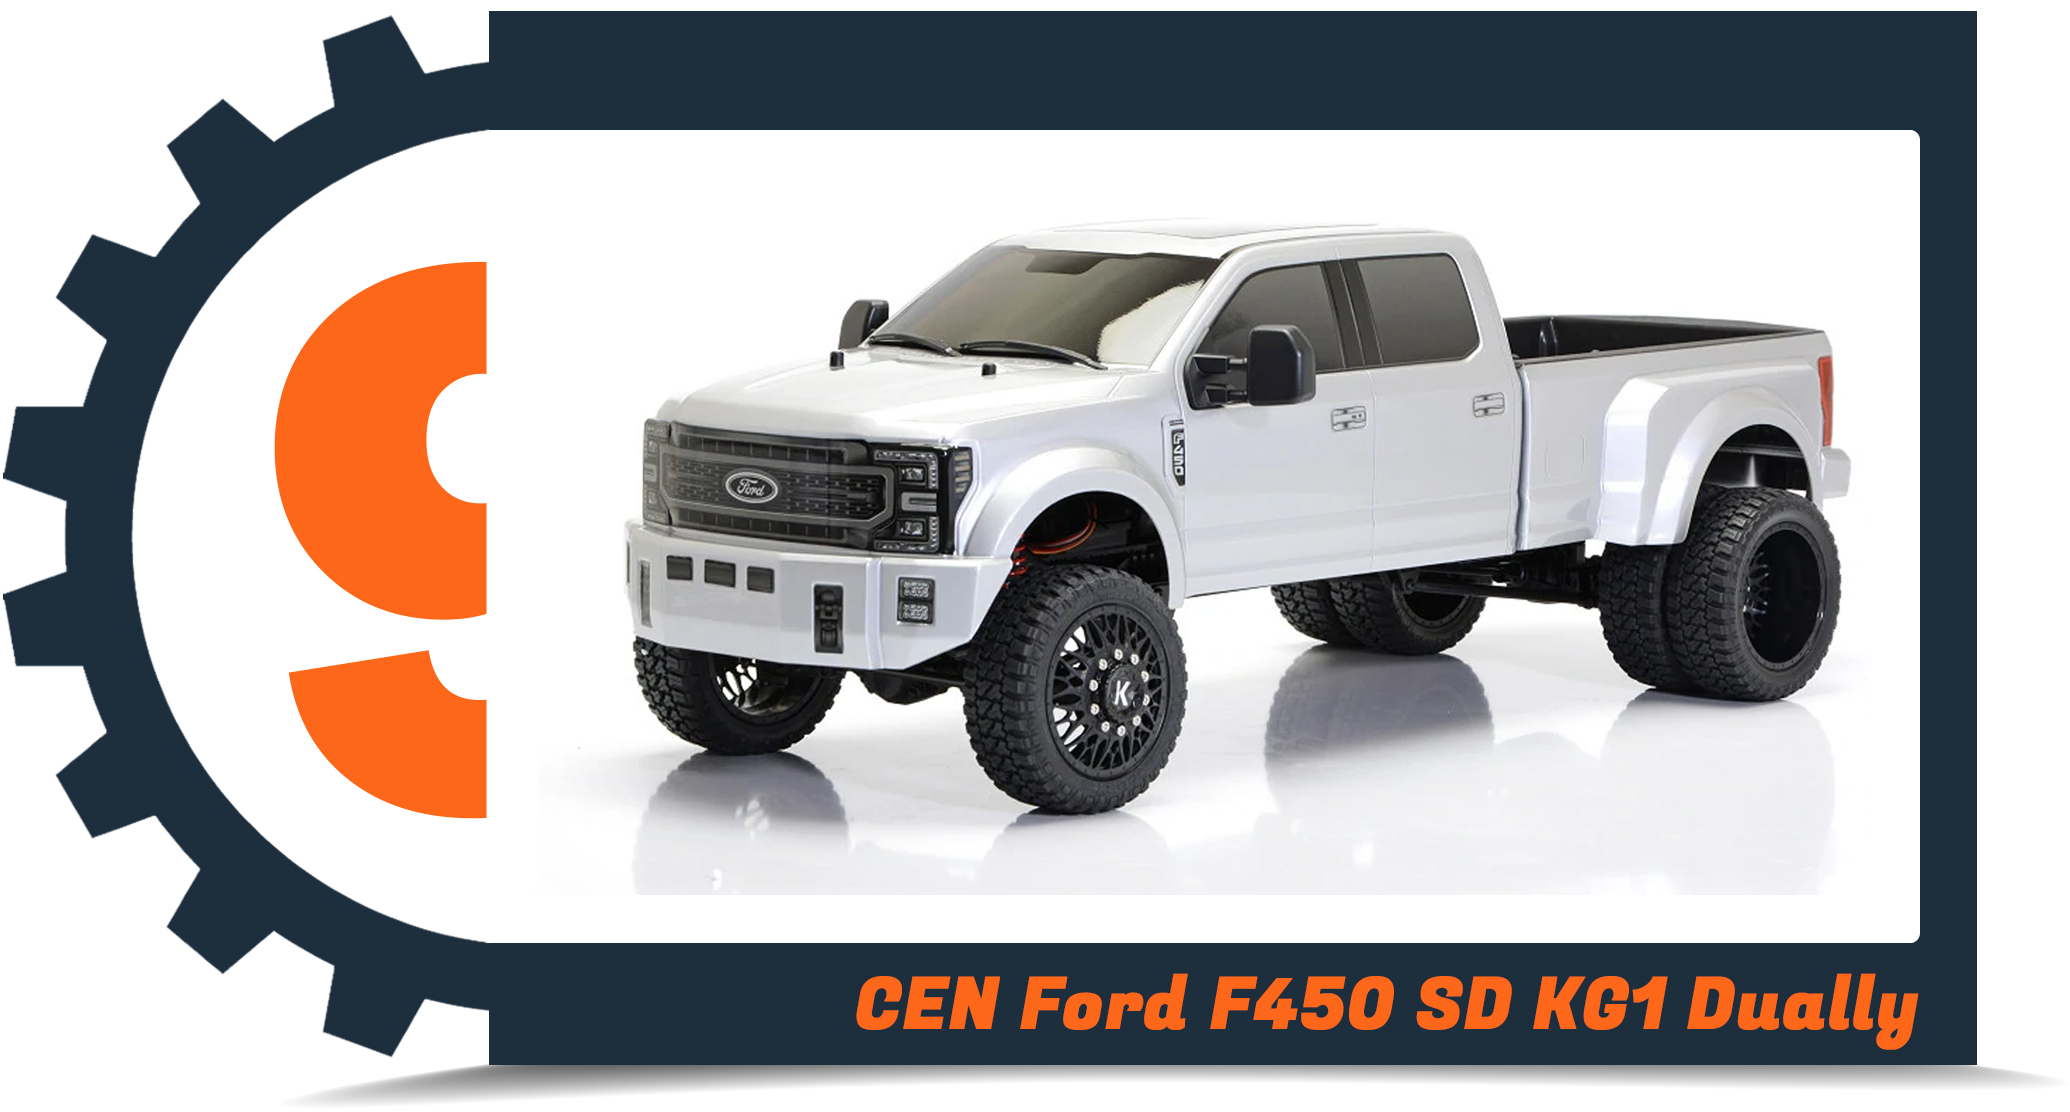 Top 10 RC Cars - Number 9 - CEN Ford F450 Dually Truck